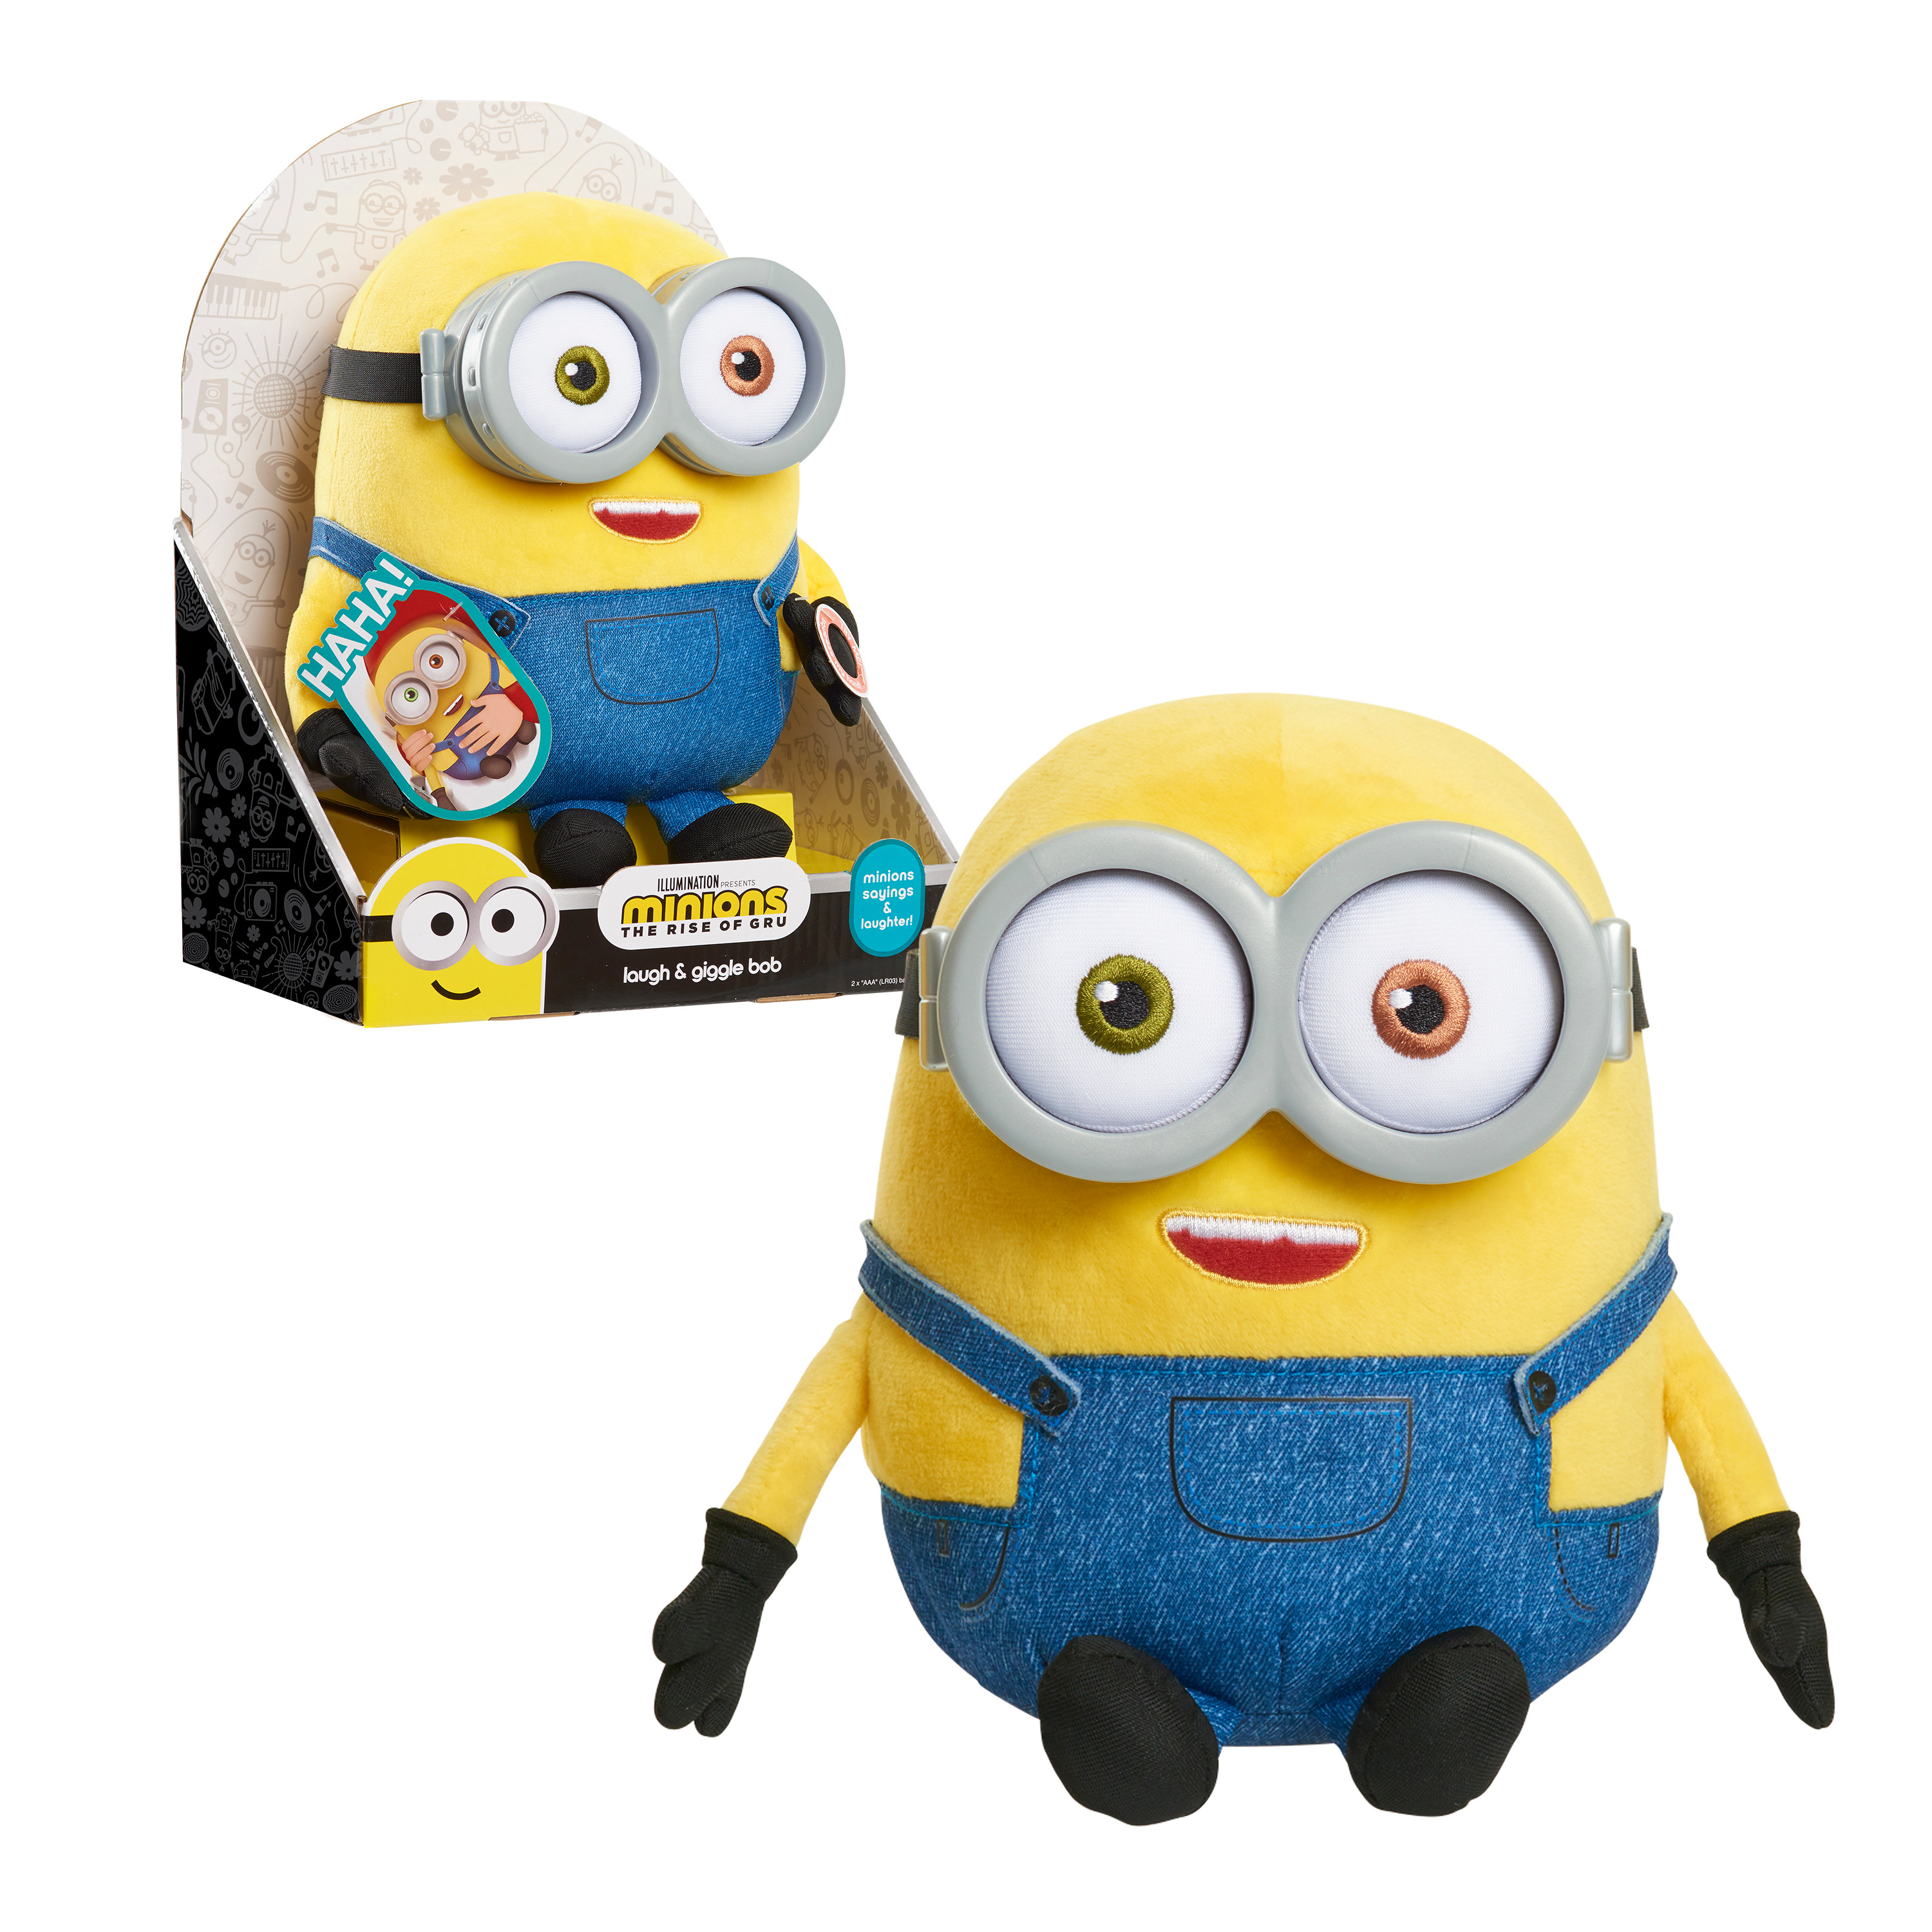 Illumination’s Minions: The Rise of Gru Laugh & Giggle Bob Plush,  Kids Toys for Ages 3 Up, Gifts and Presents - image 1 of 3